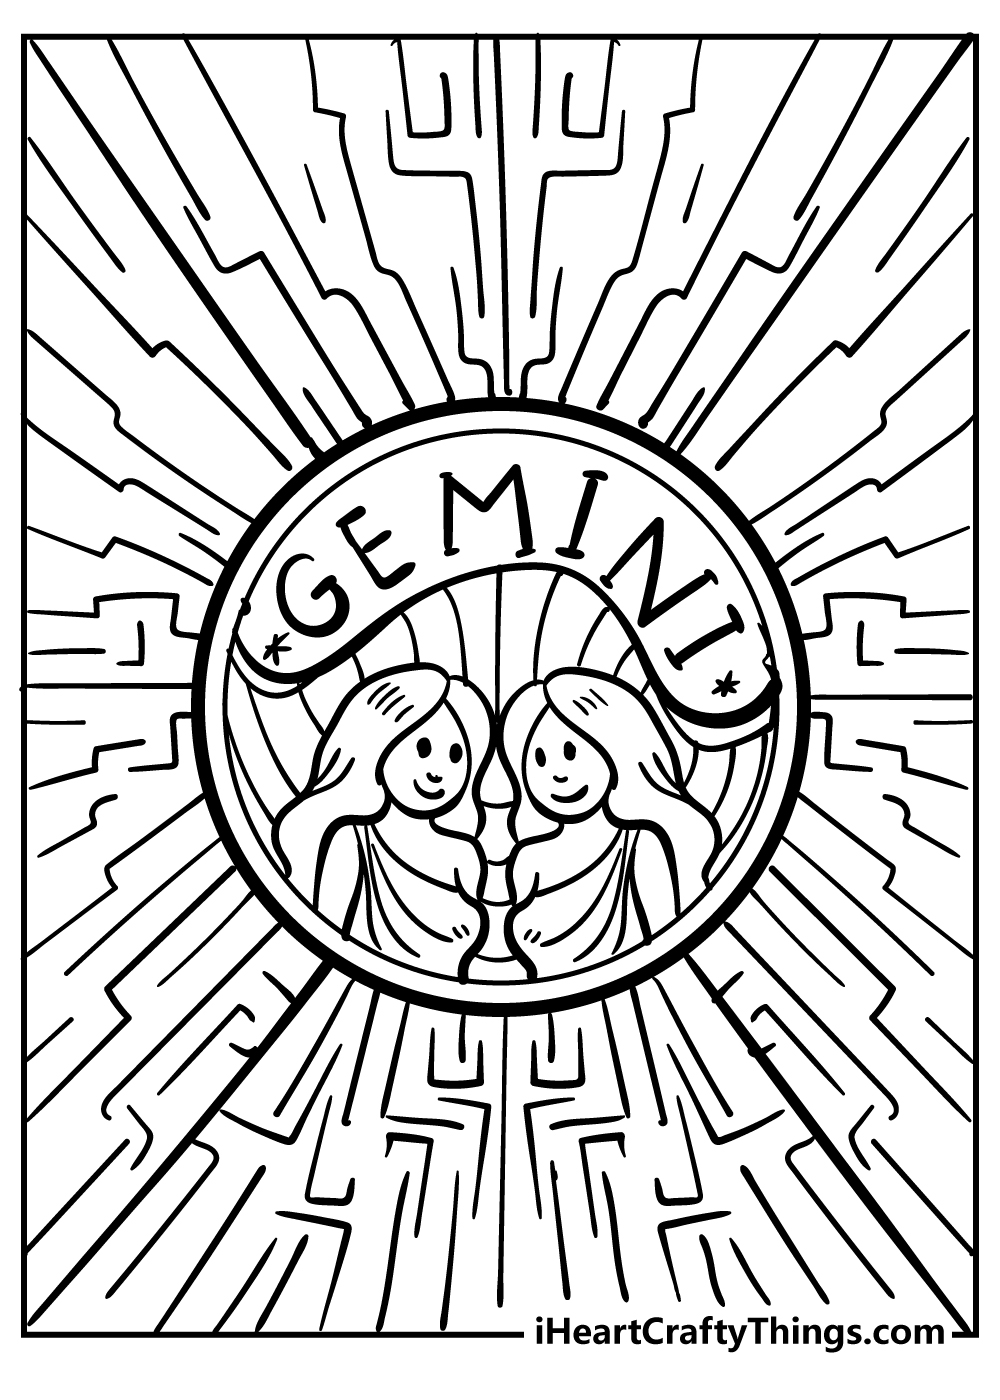 Zodiac Sign Coloring Pages free pdf download